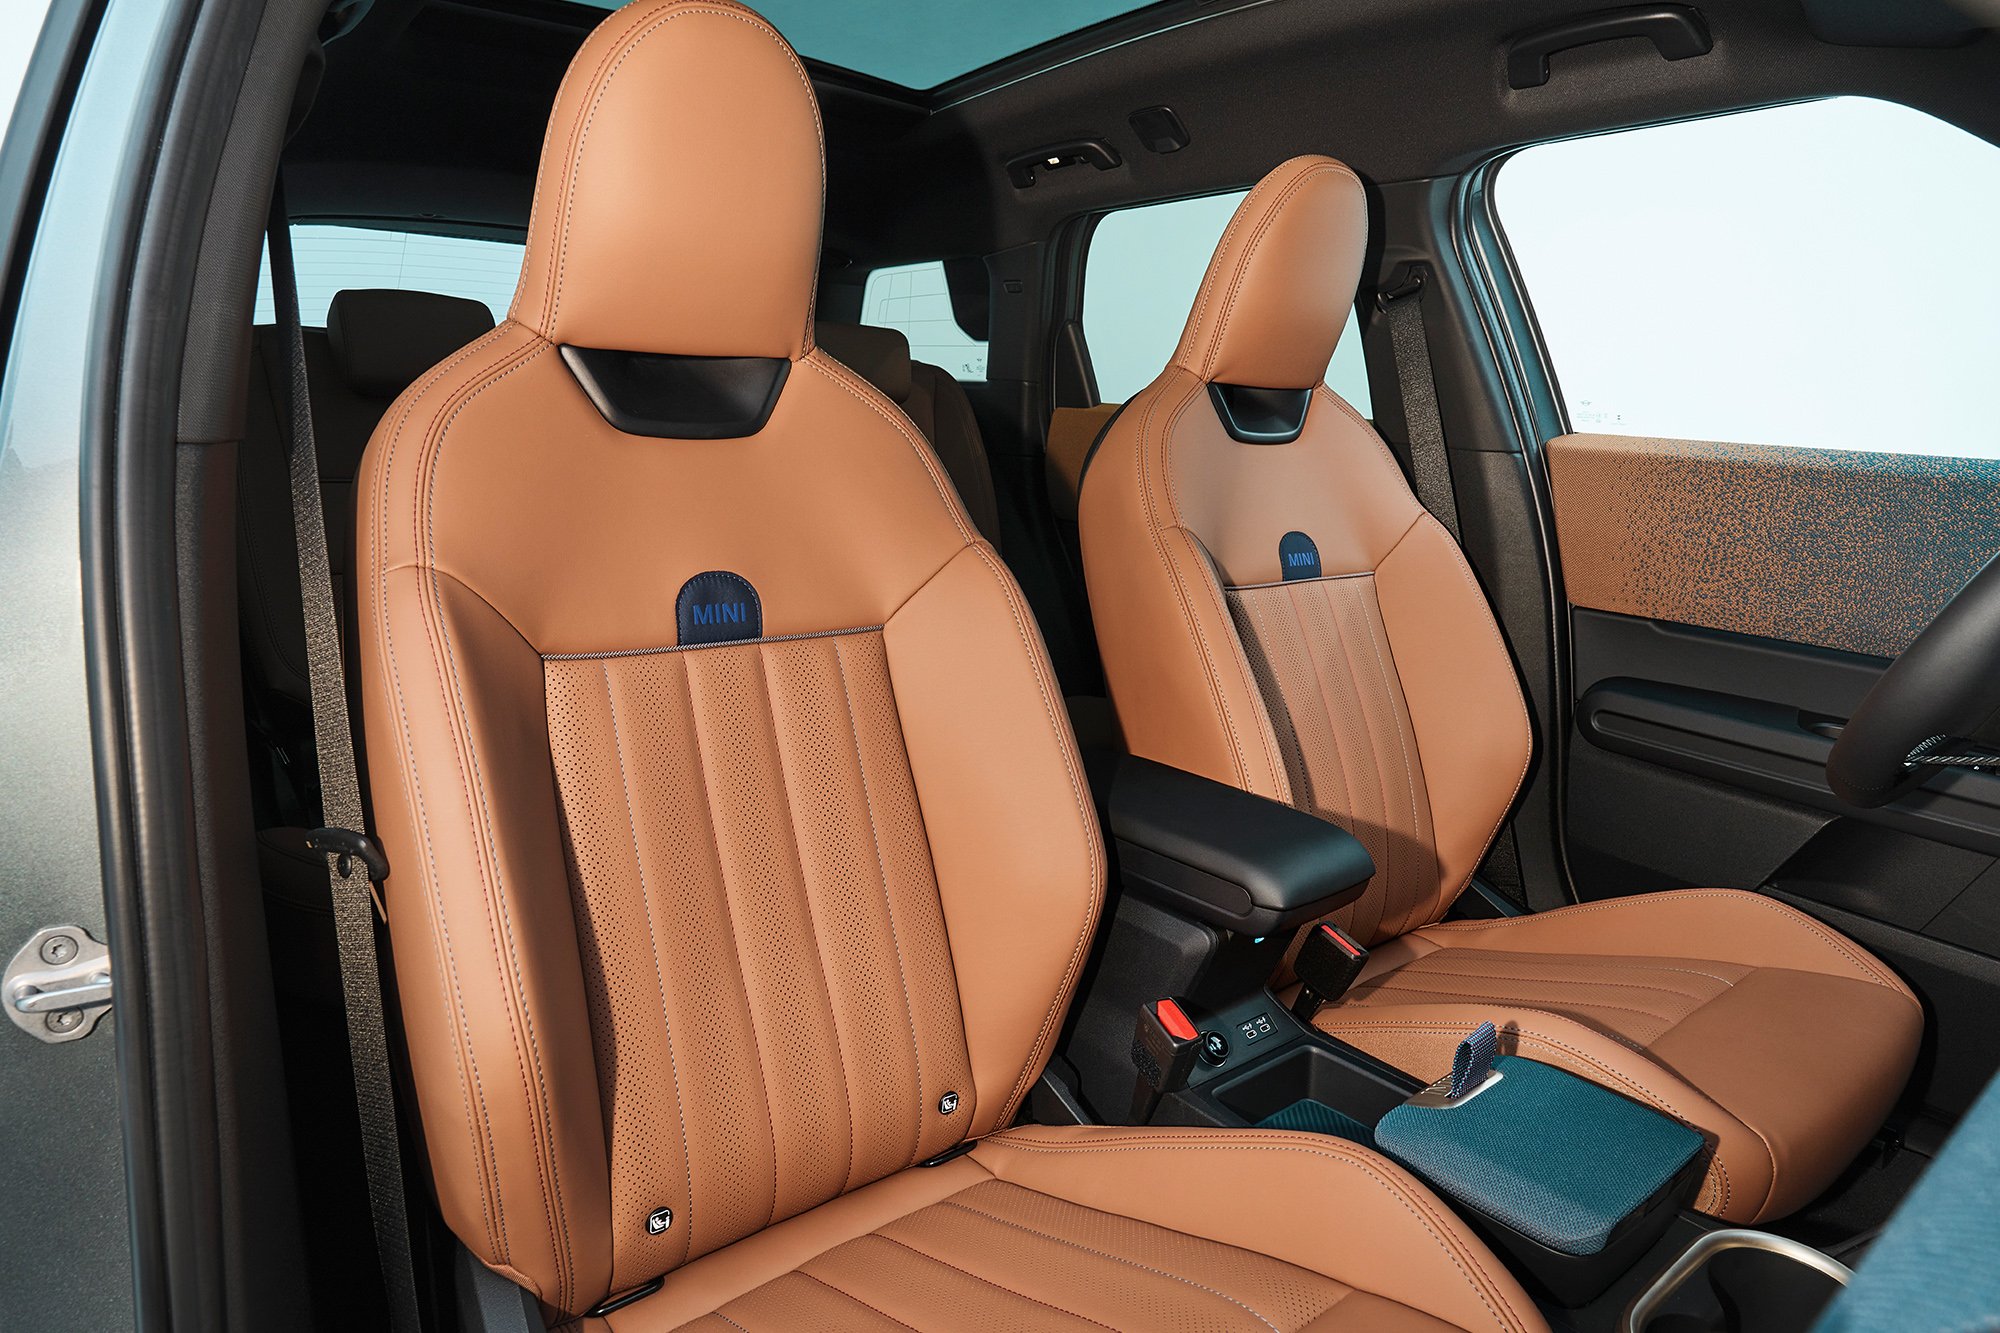 The seat design of the new all-electric MINI Countryman